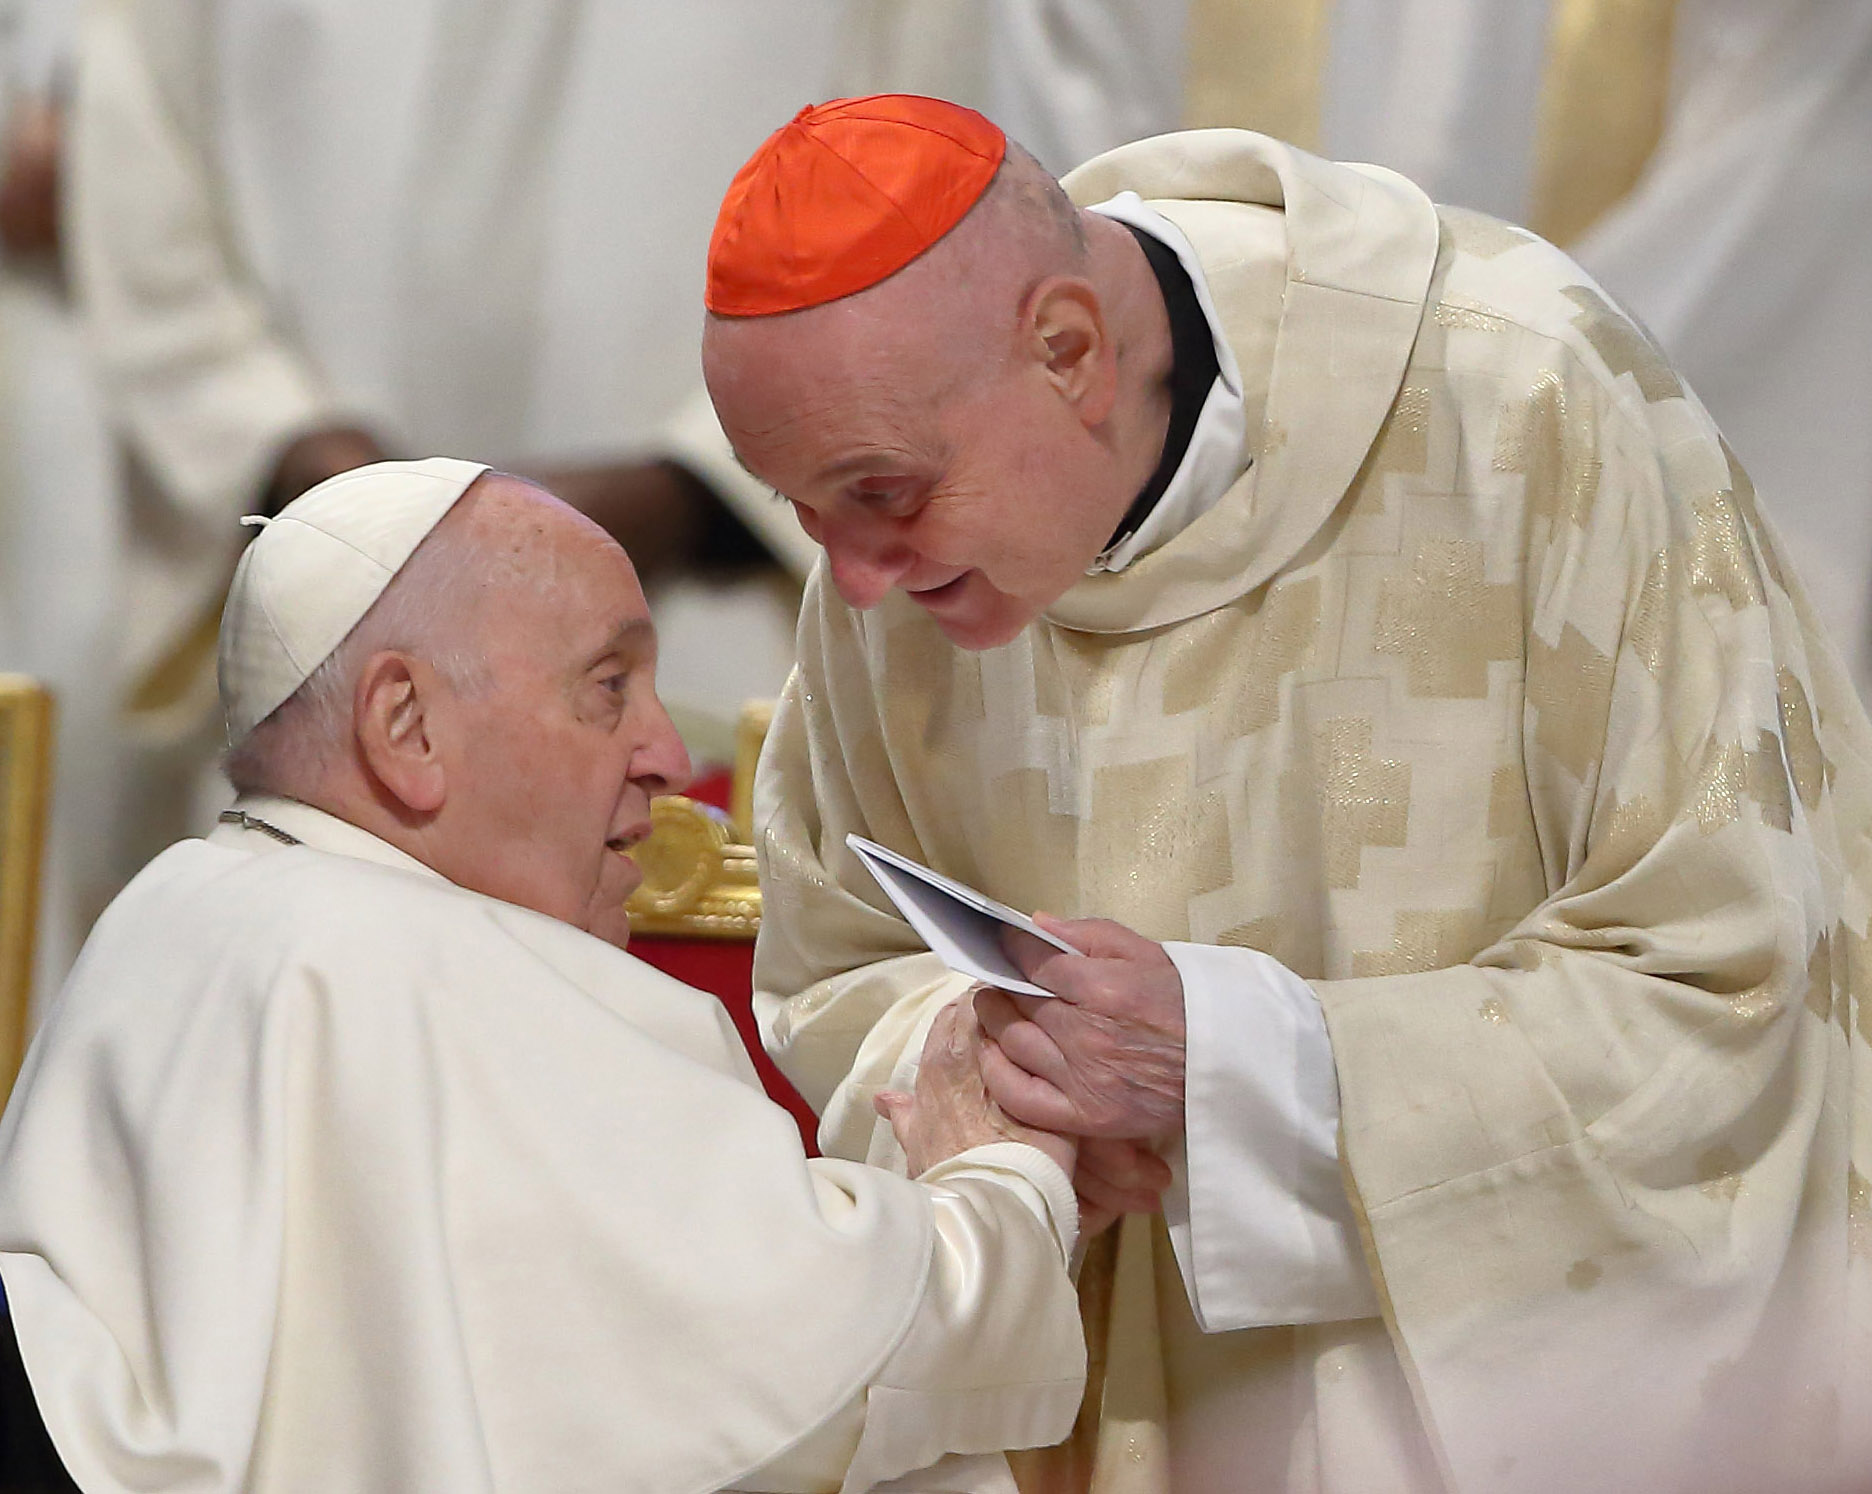 The Catholic pope, seated and wearing a white robe and cap, speaks with a bishop, standing and leaning in, wearing a white robe and red cap.